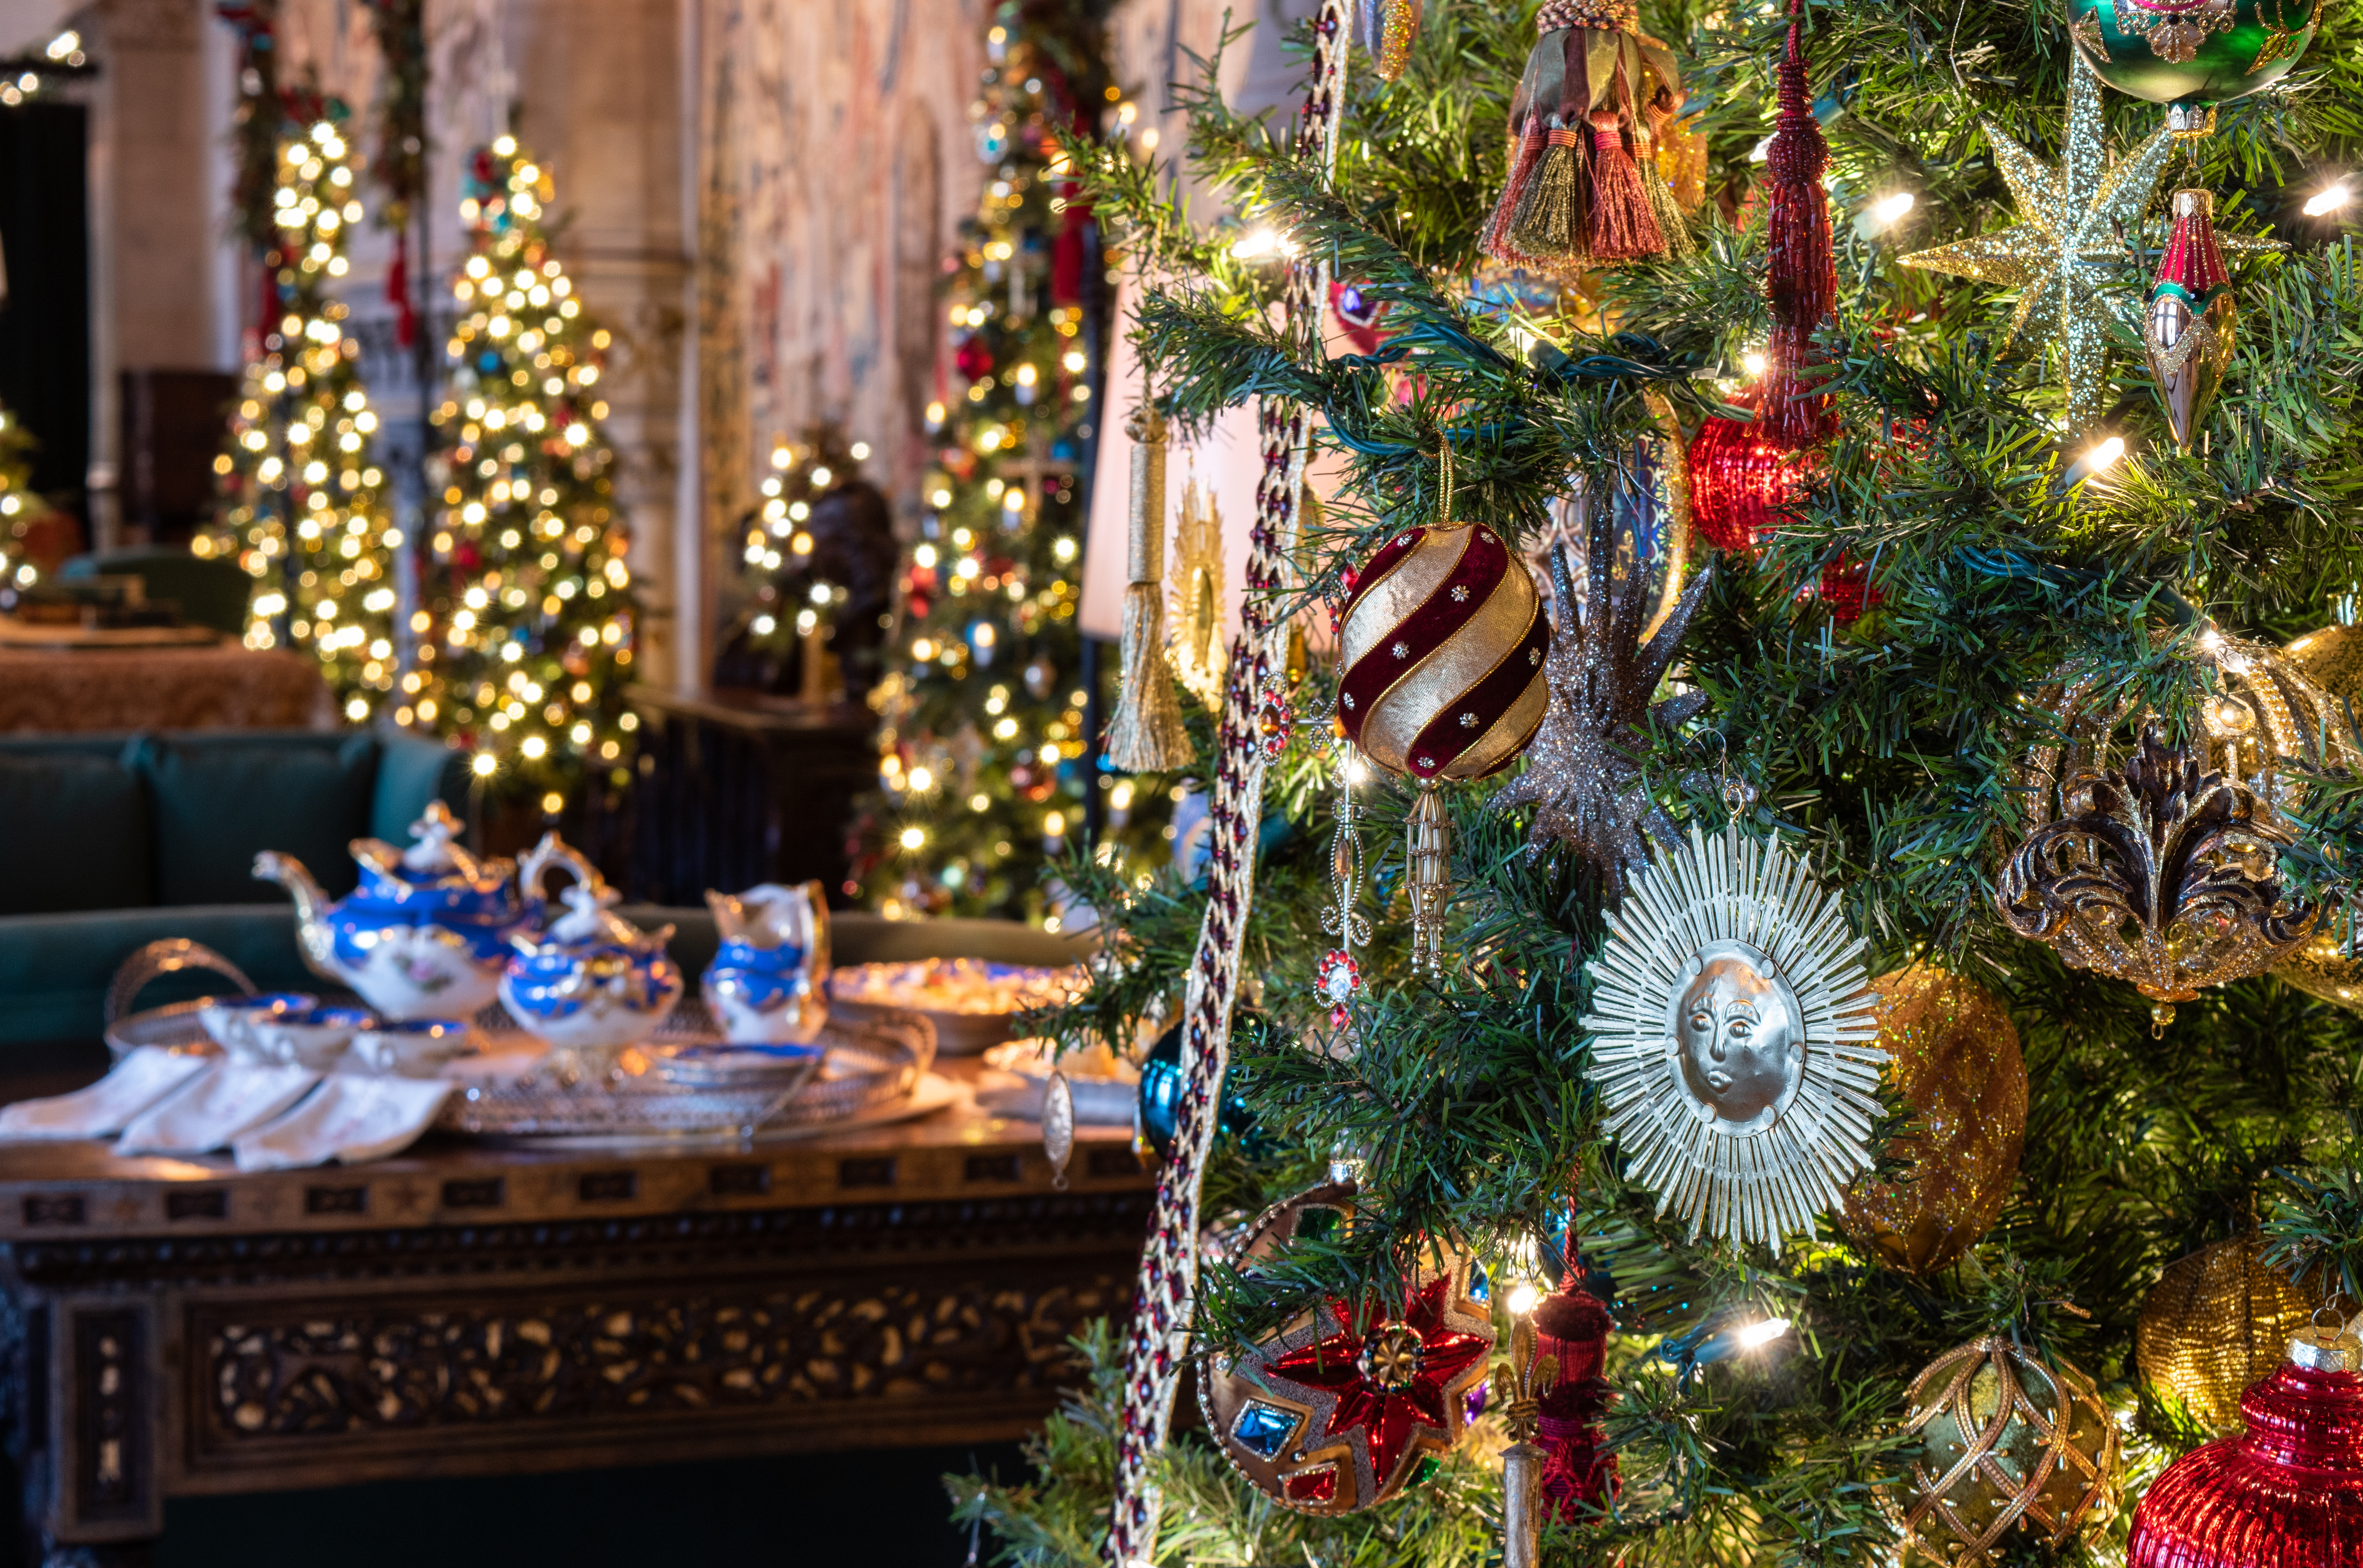 Gorgeous ornaments decorate the trees in the Tapestry Gallery during Christmas at Biltmore